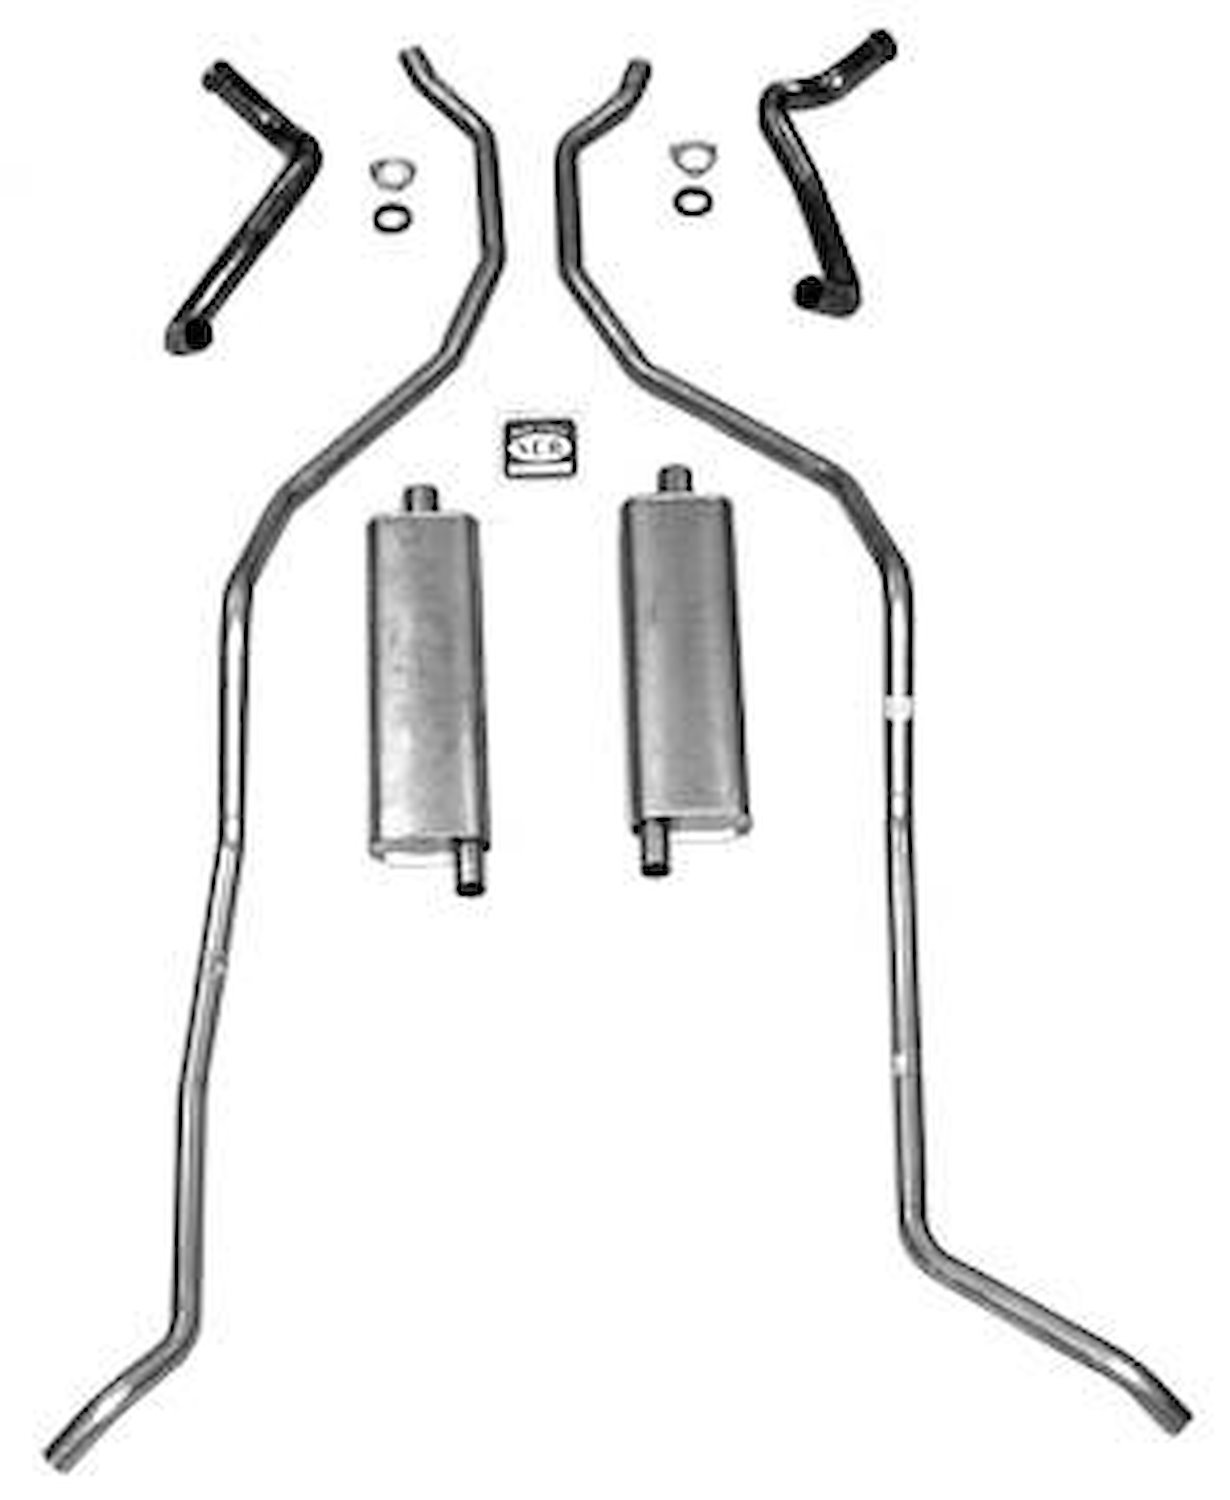 73013S 1959 Chevrolet Full-Size Exhaust System 348 Hi-Performance w/ 2-1/2 in. Dual Exhaust, 304 Stainless Steel